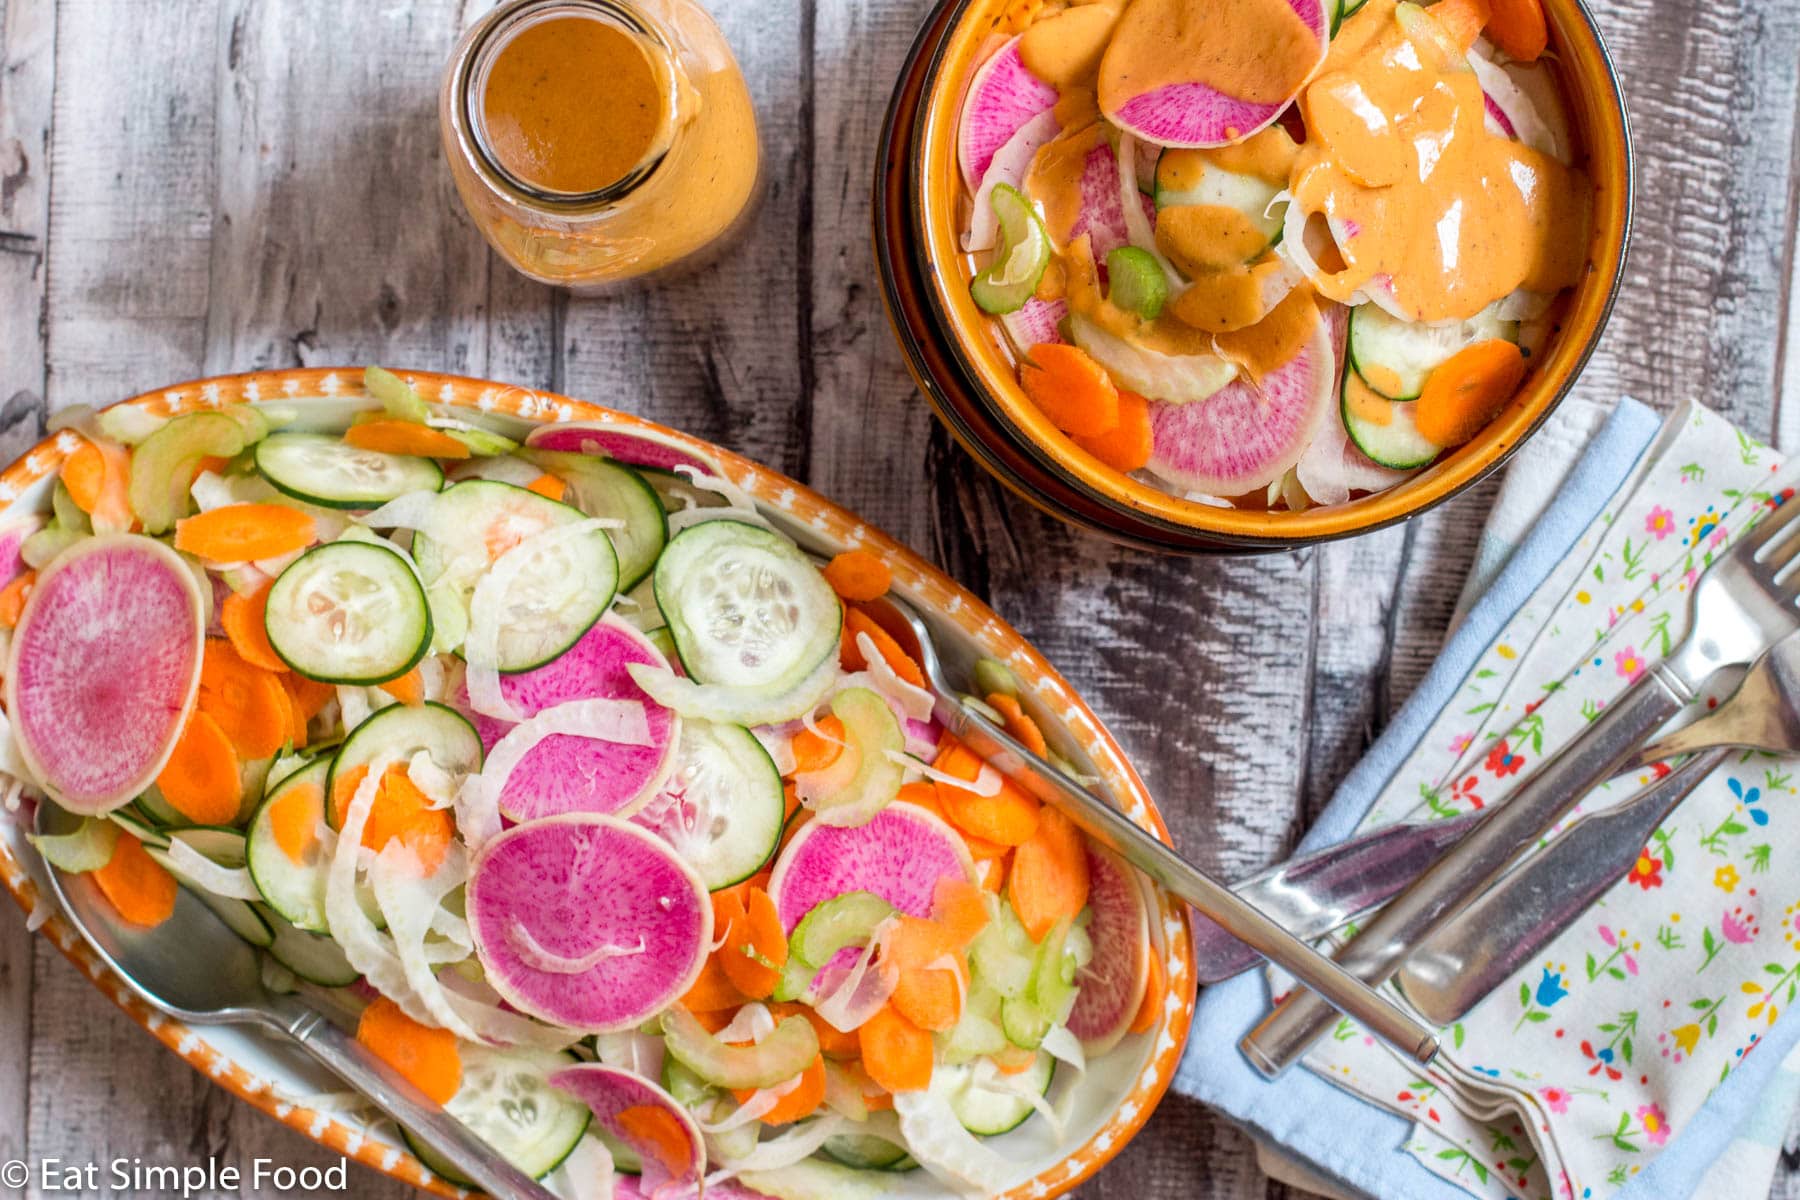 top view of oval shallow bowl and wooden small bowl filled with colorful sliced watermelon radishes, cucumber, fennel, carrots, and celery. Jar of red tomato dressing on the side.